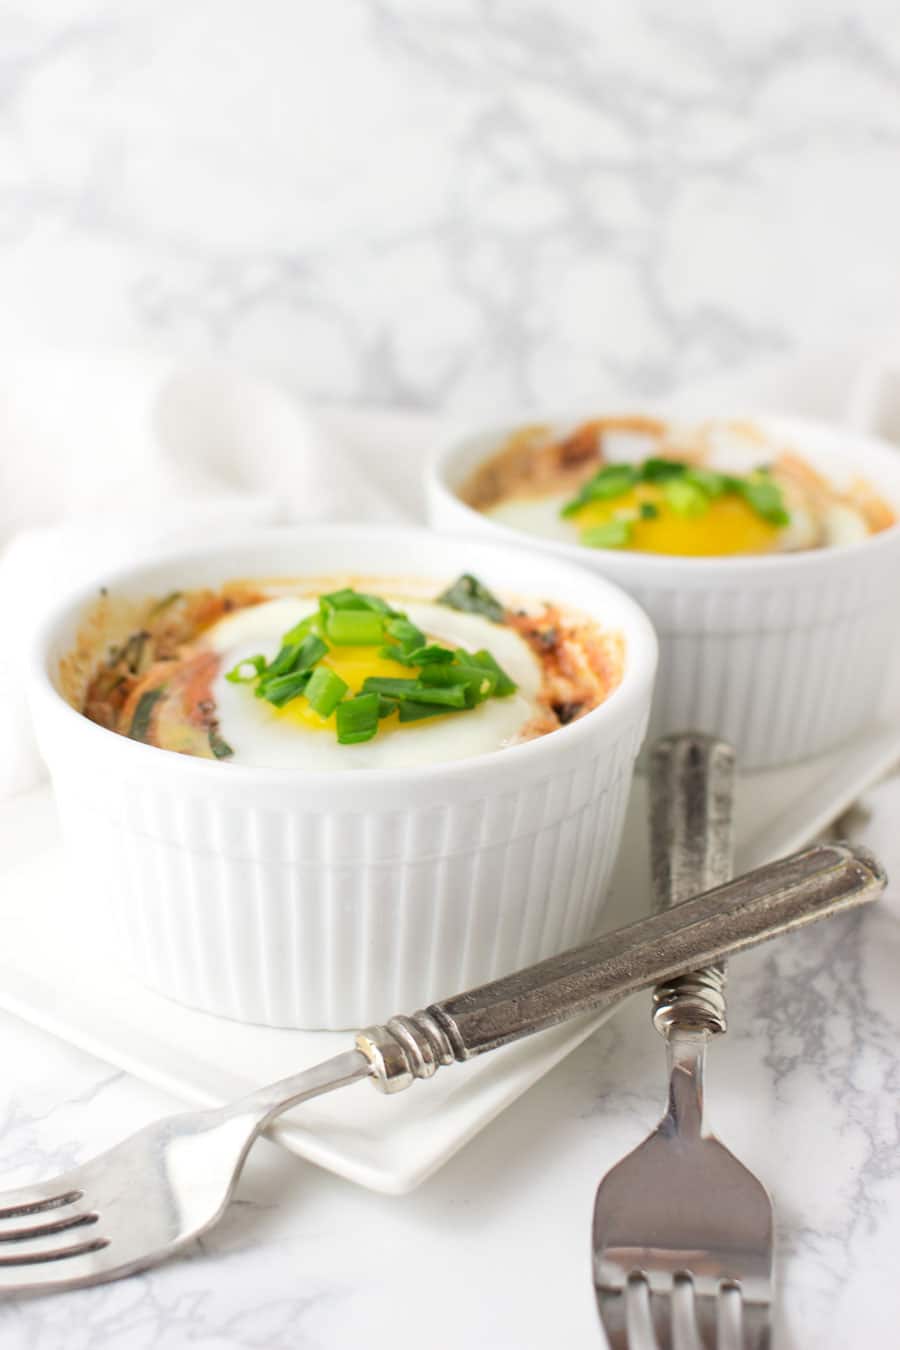 Italian Sausage and Egg Bake recipe from acleanplate.com #paleo #recipe #healthy